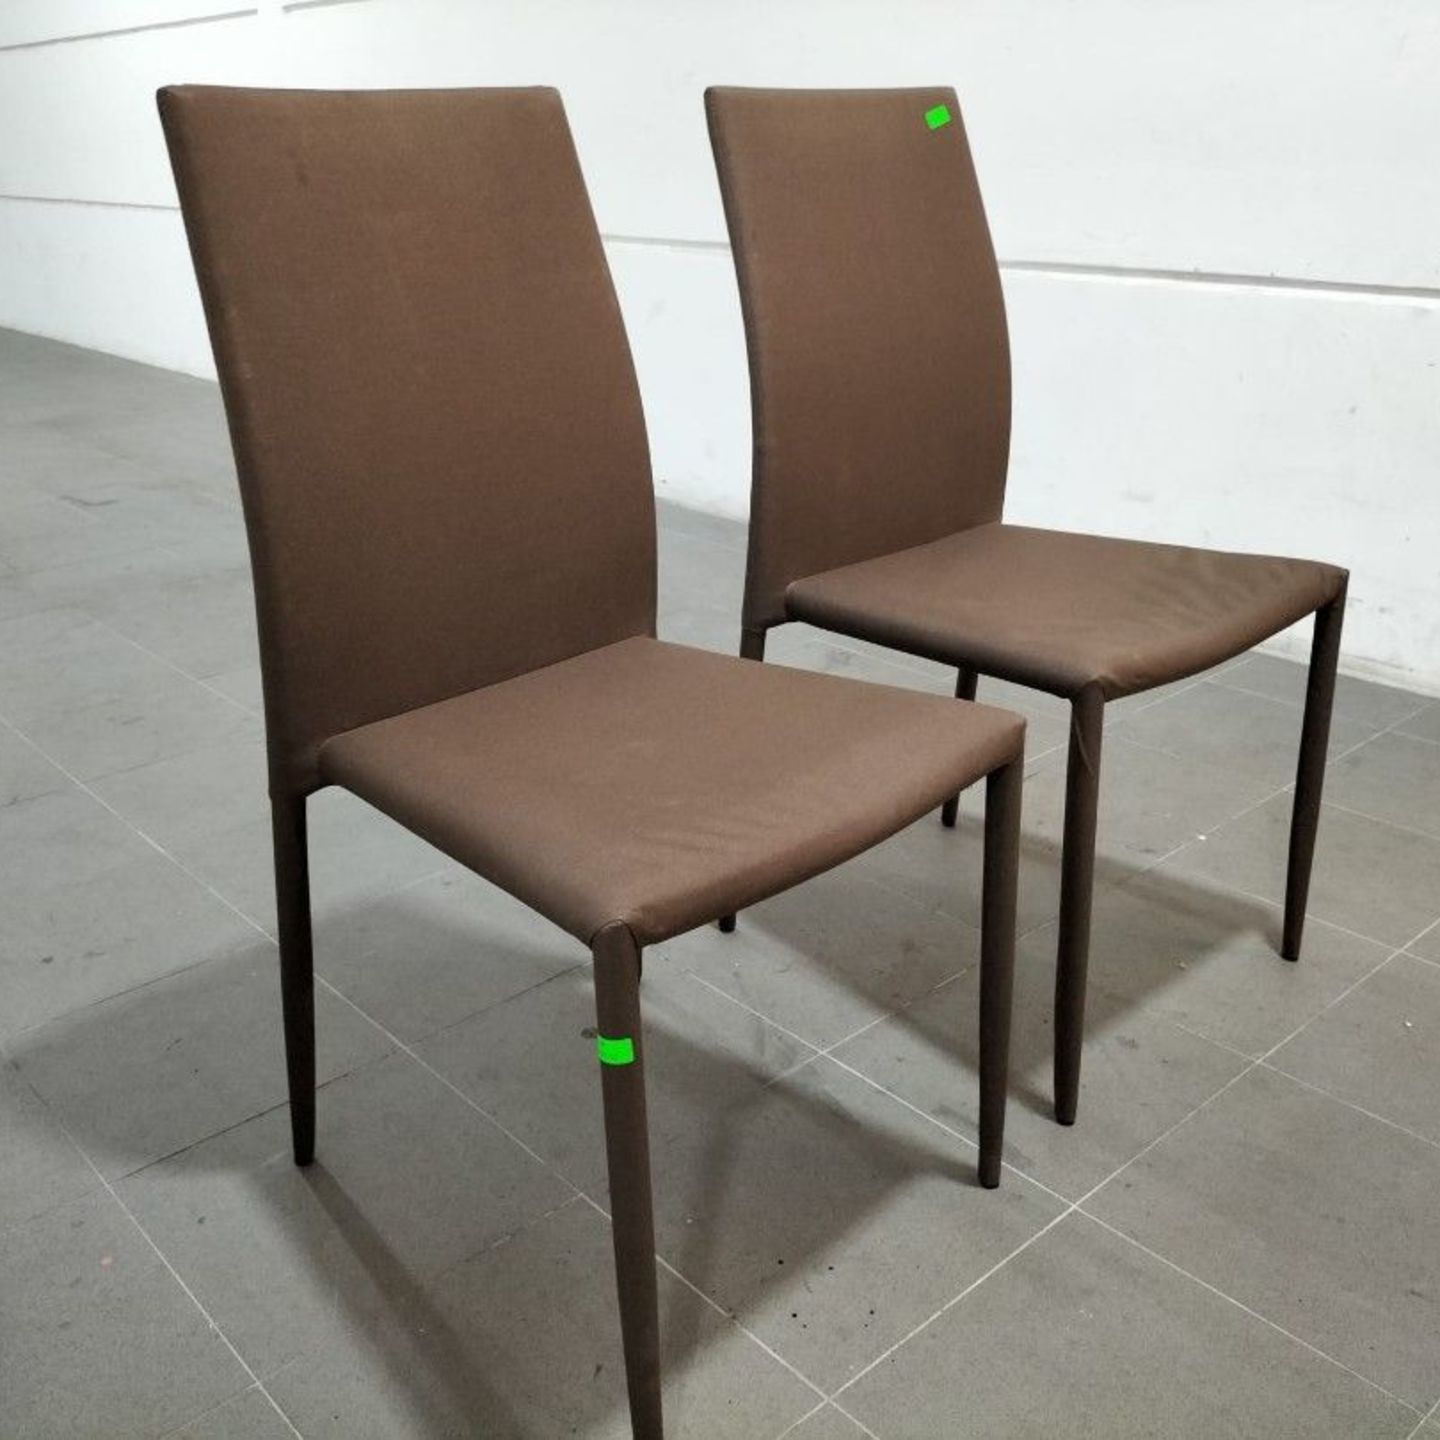 2 x COOPER Dining Chairs in BROWN FABRIC